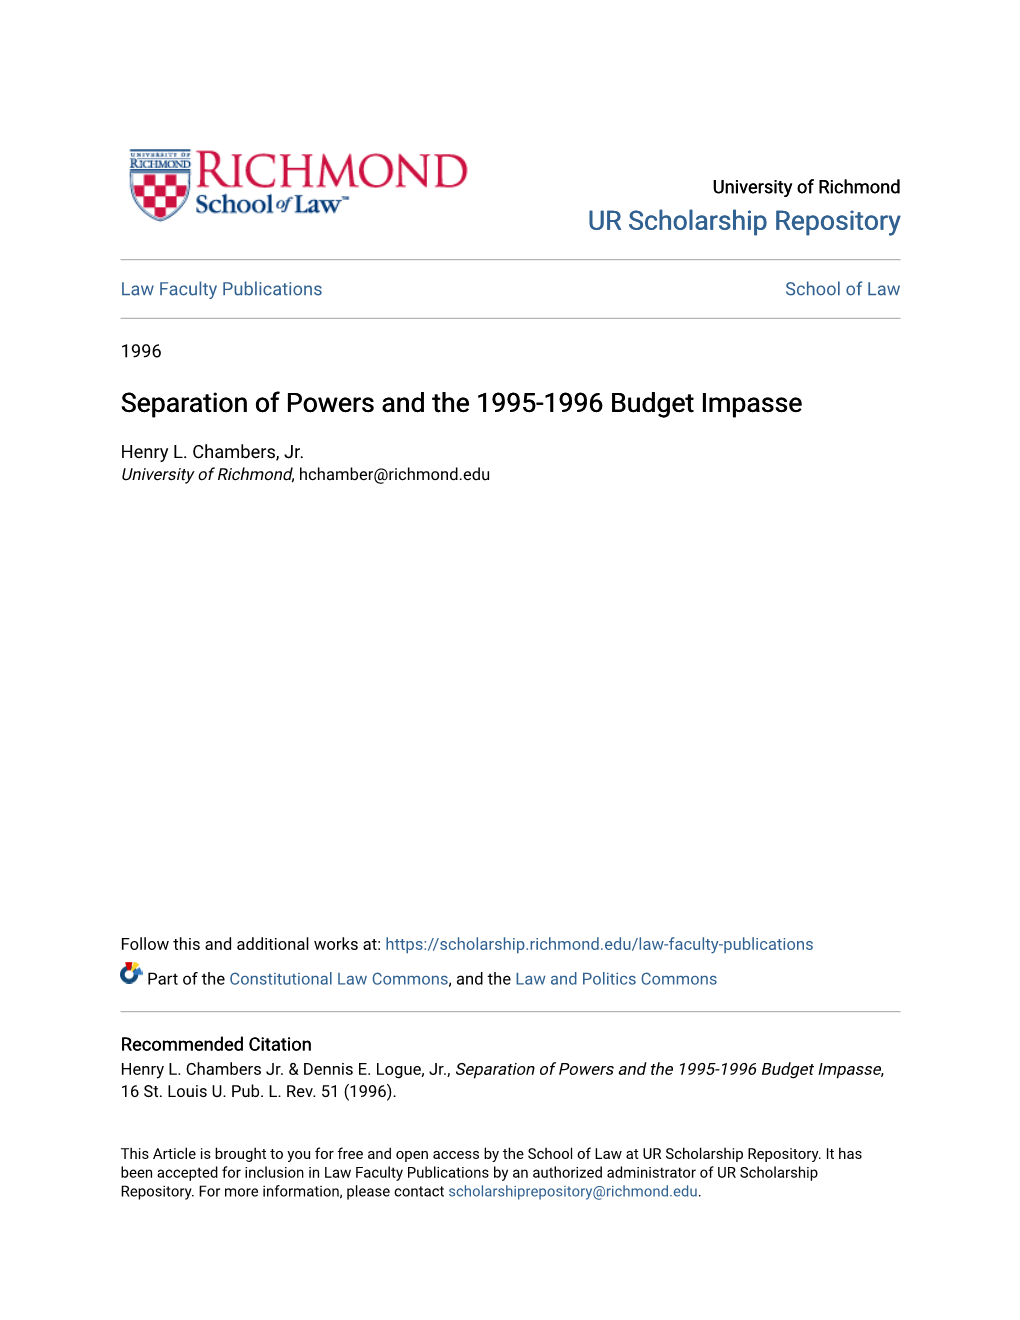 Separation of Powers and the 1995-1996 Budget Impasse